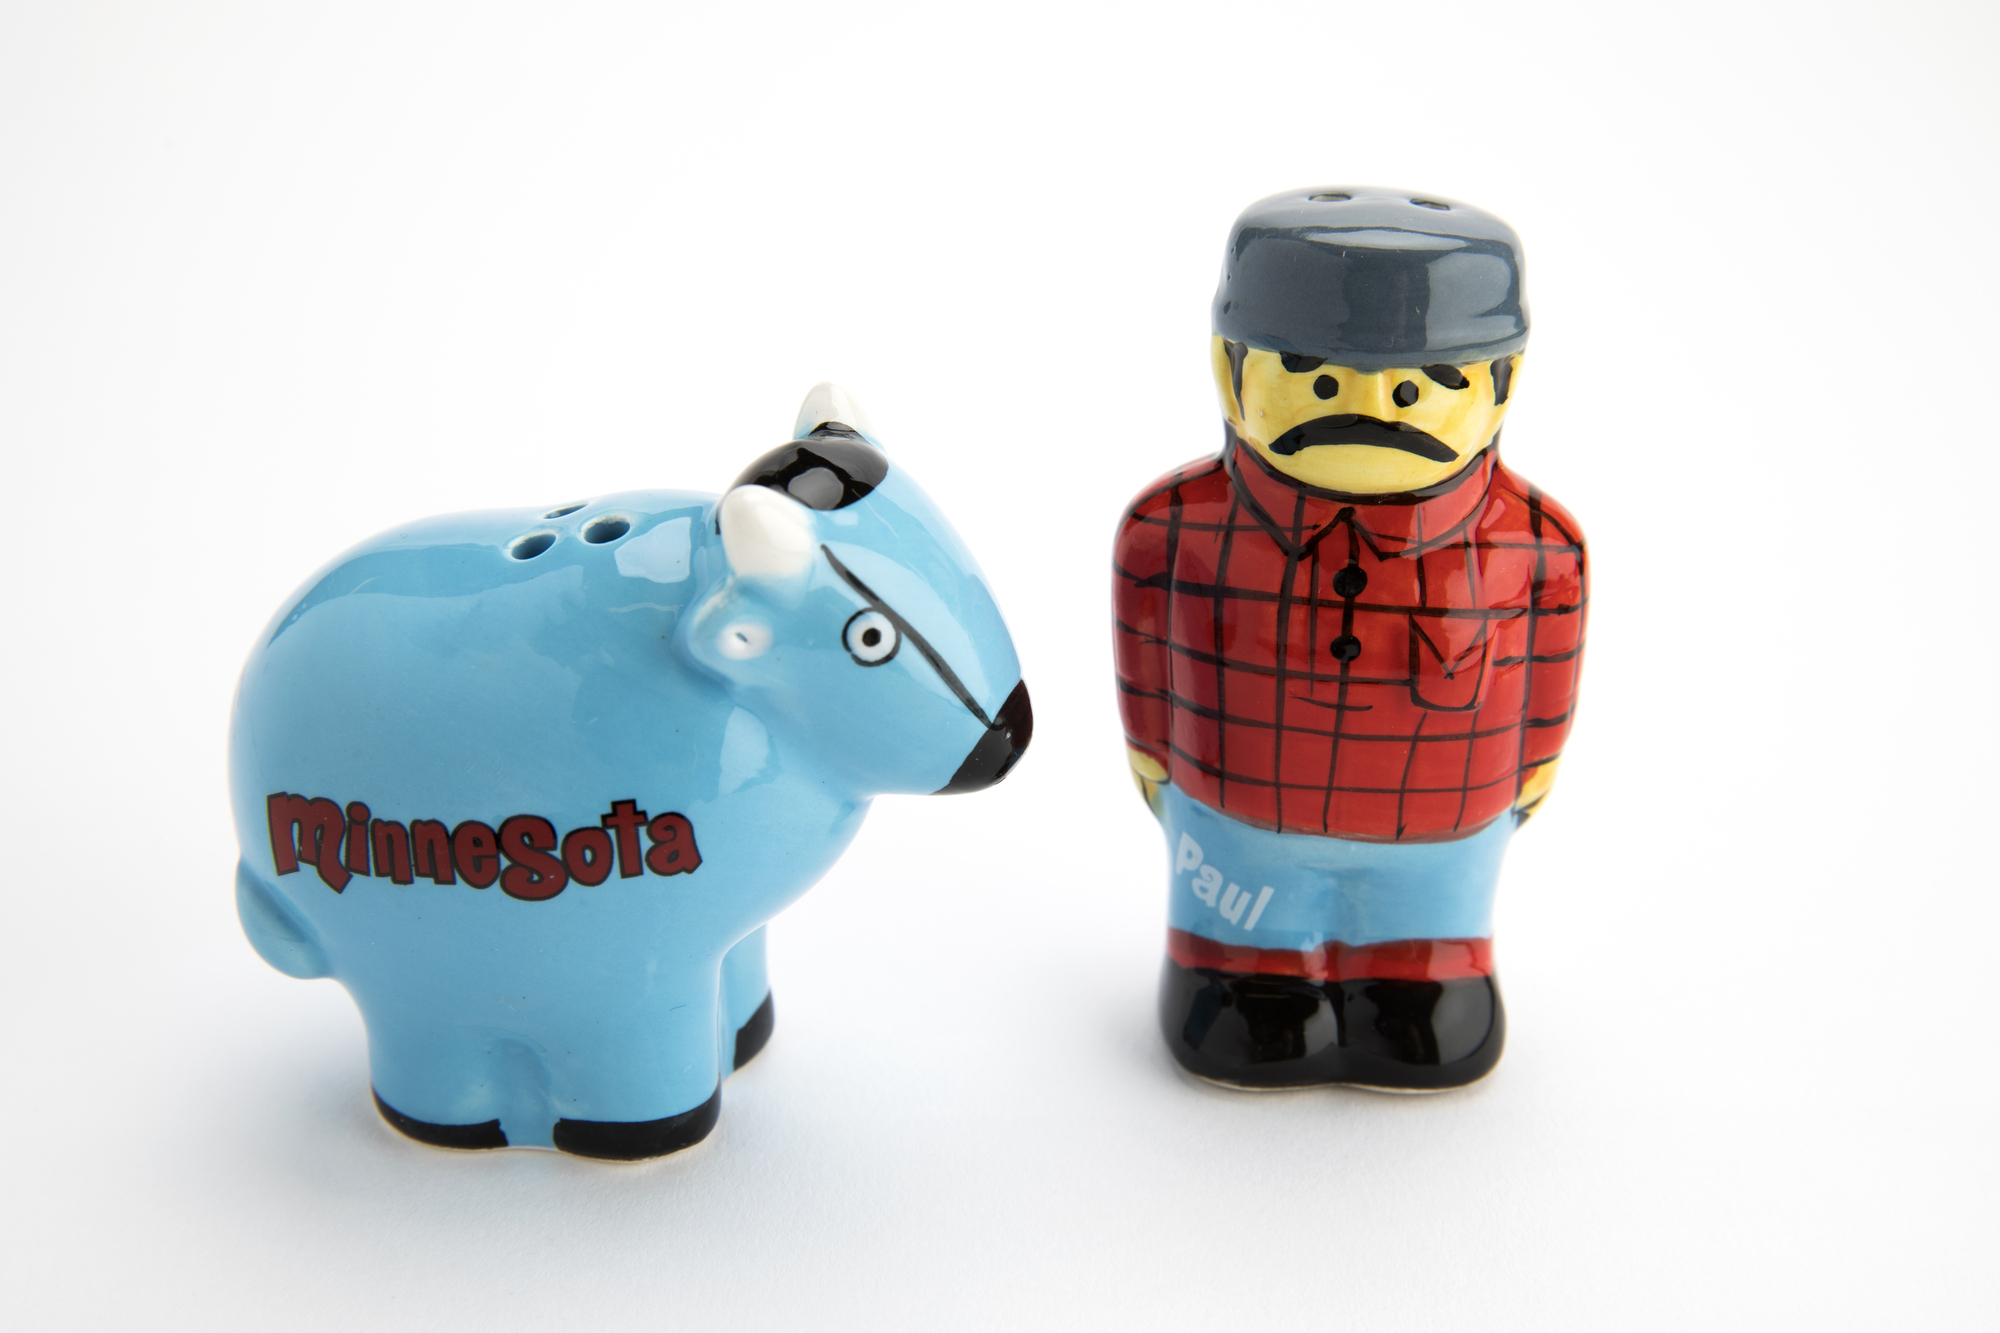 Paul and Babe salt-and-pepper shakers, $13